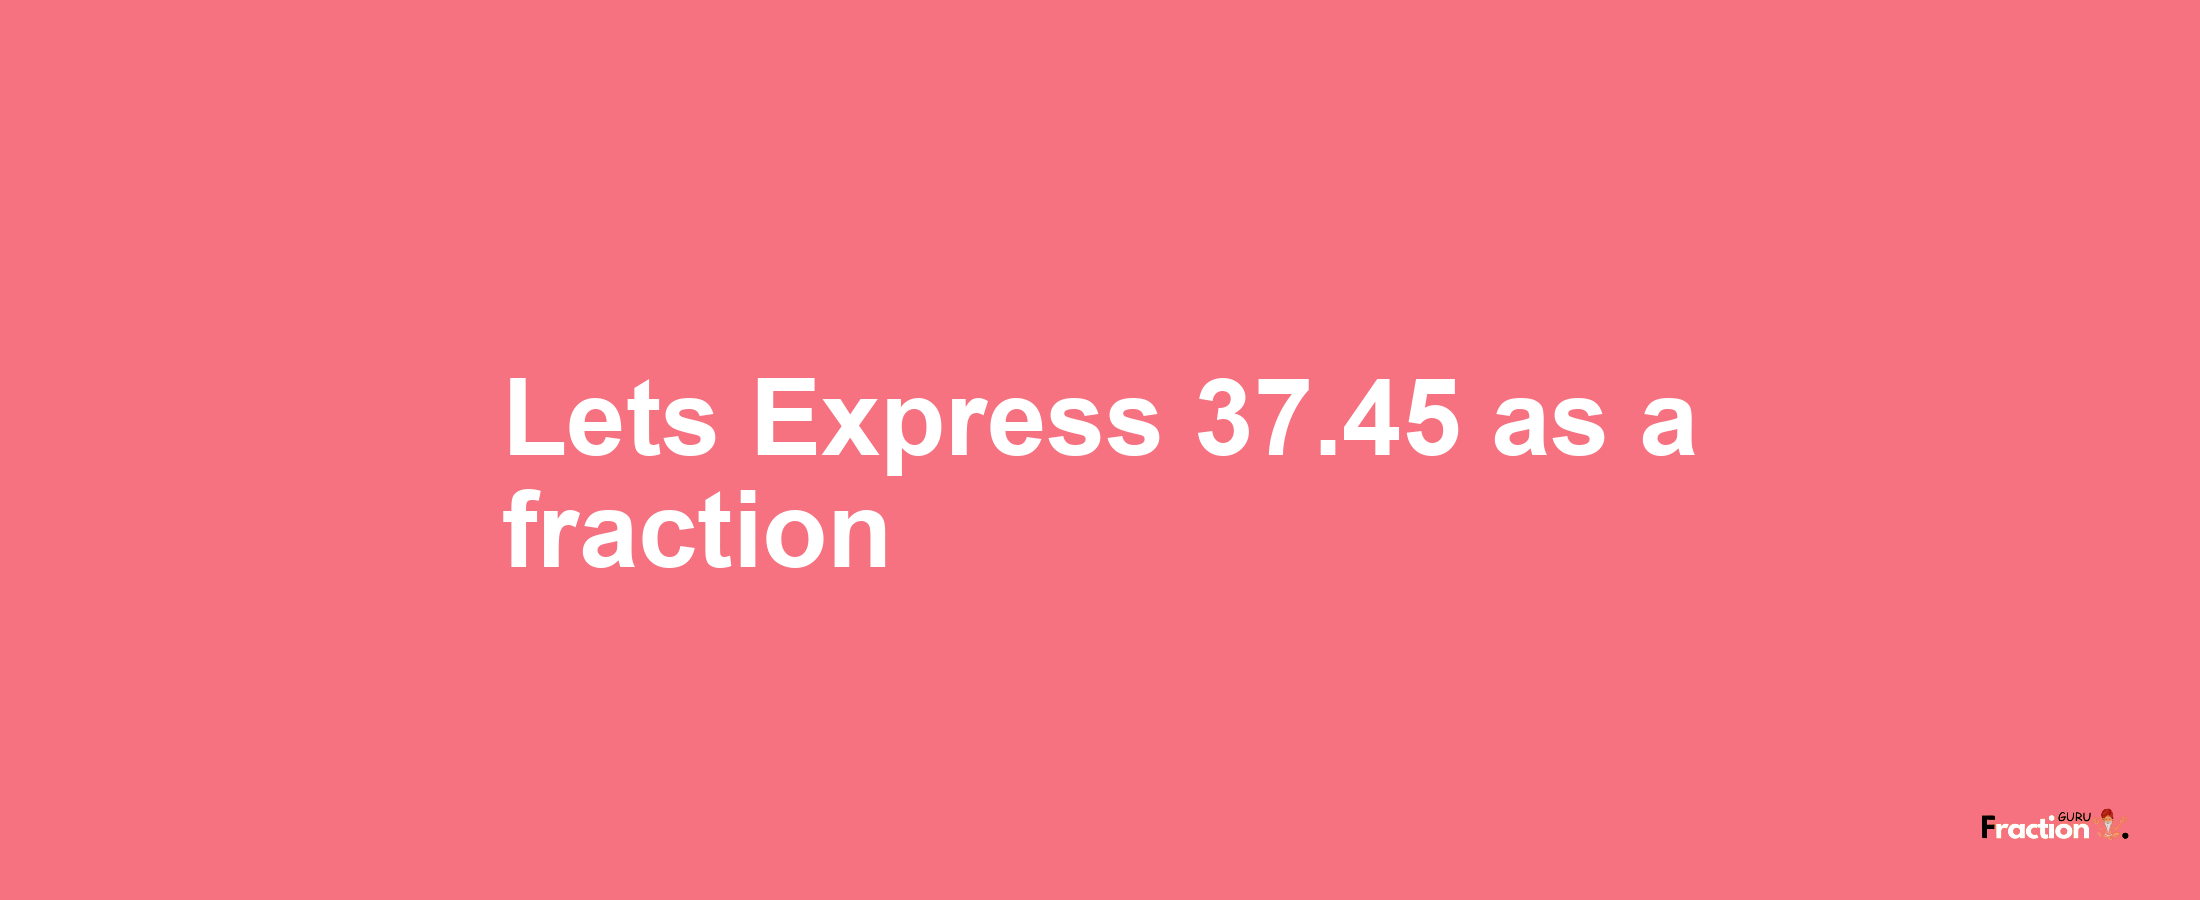 Lets Express 37.45 as afraction